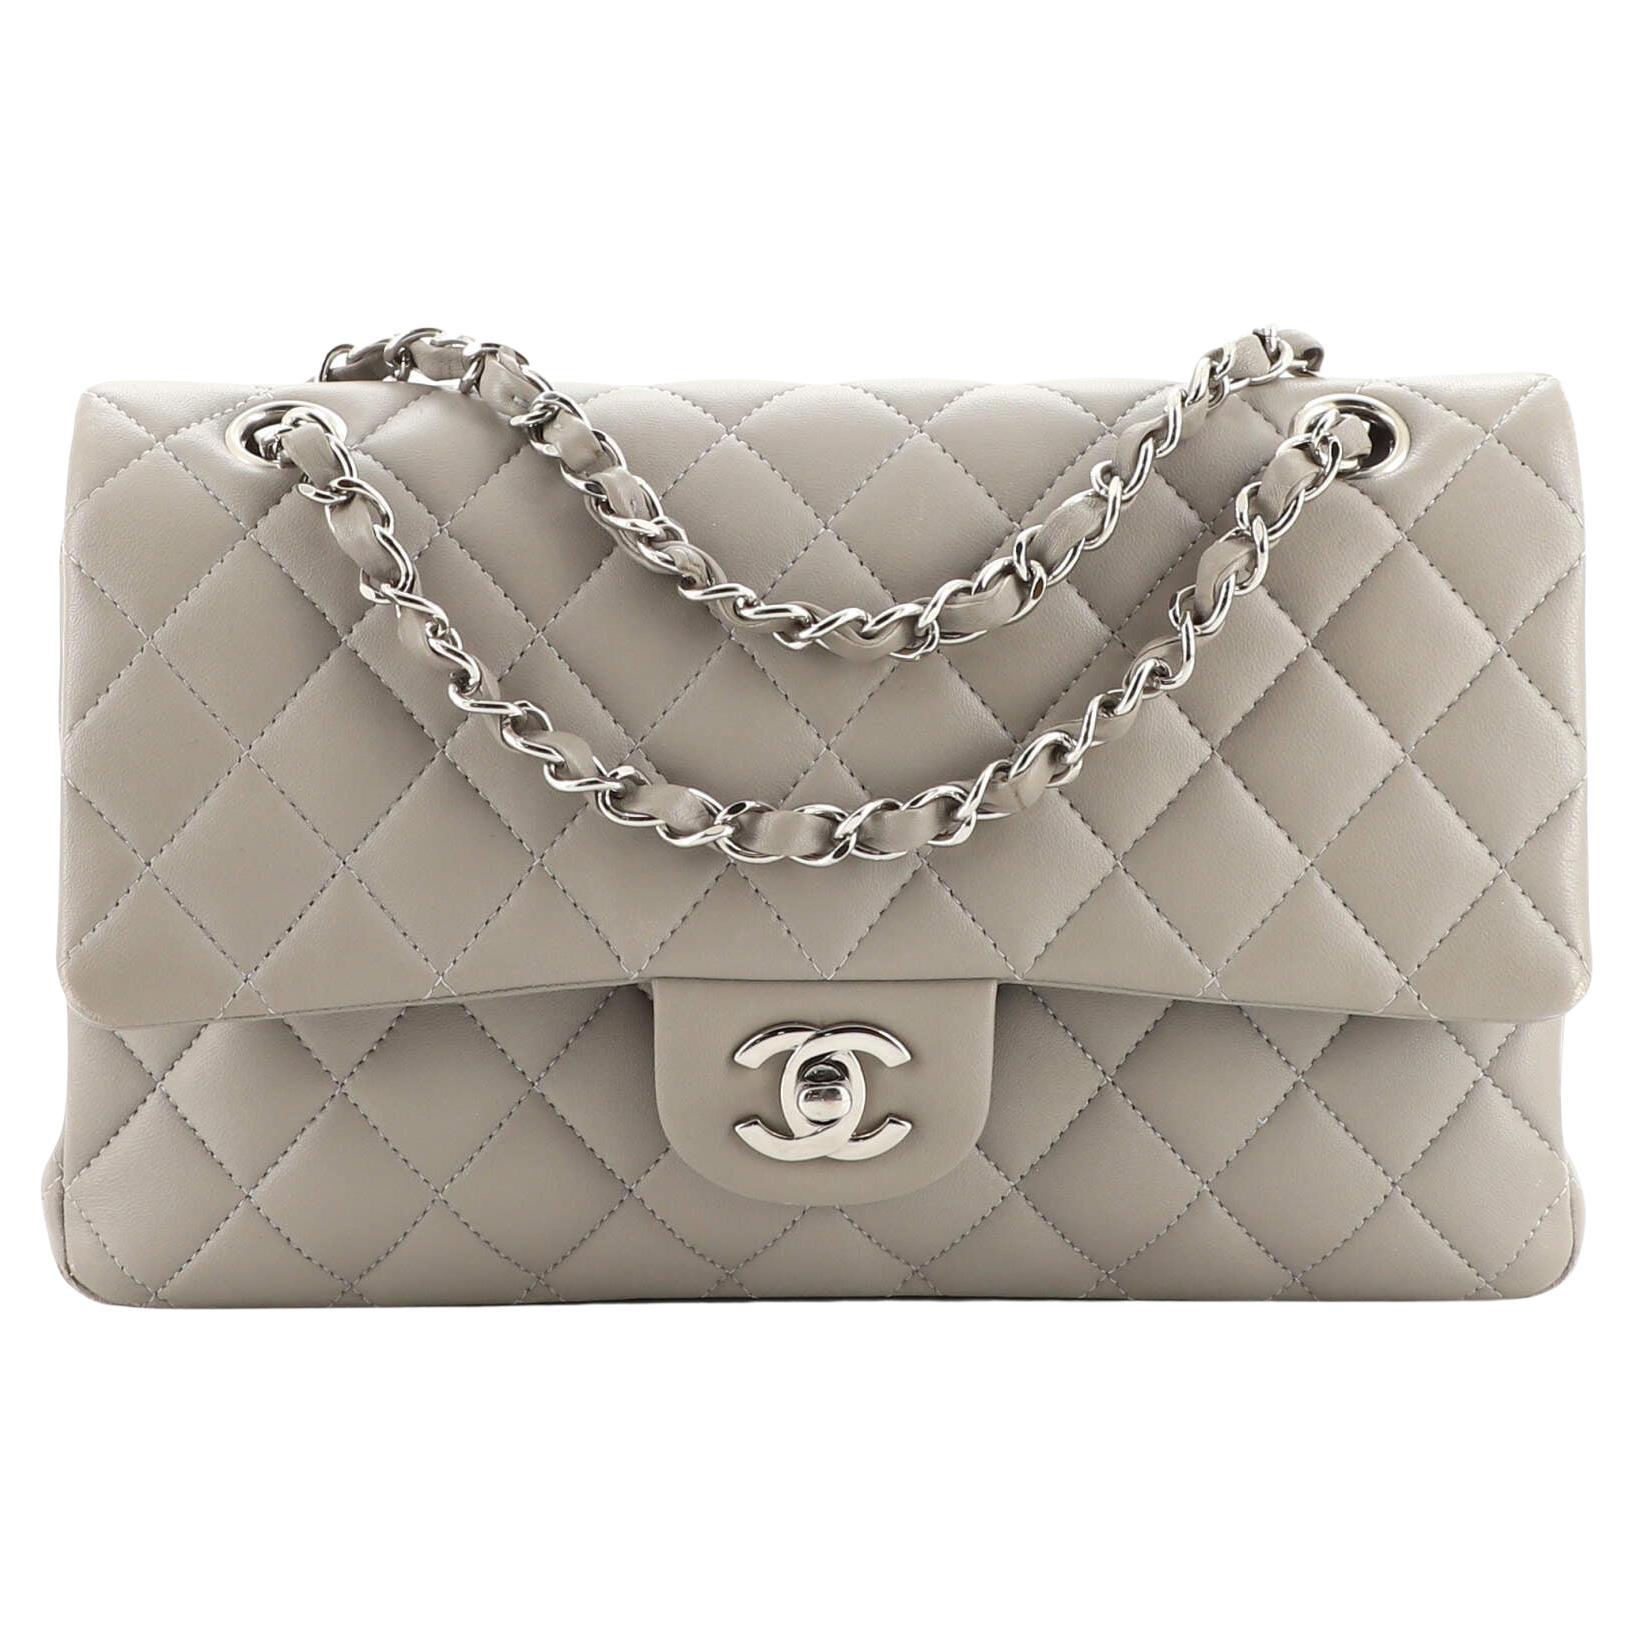 CHANEL Perforated Lambskin Quilted Medium Double Flap Light Blue